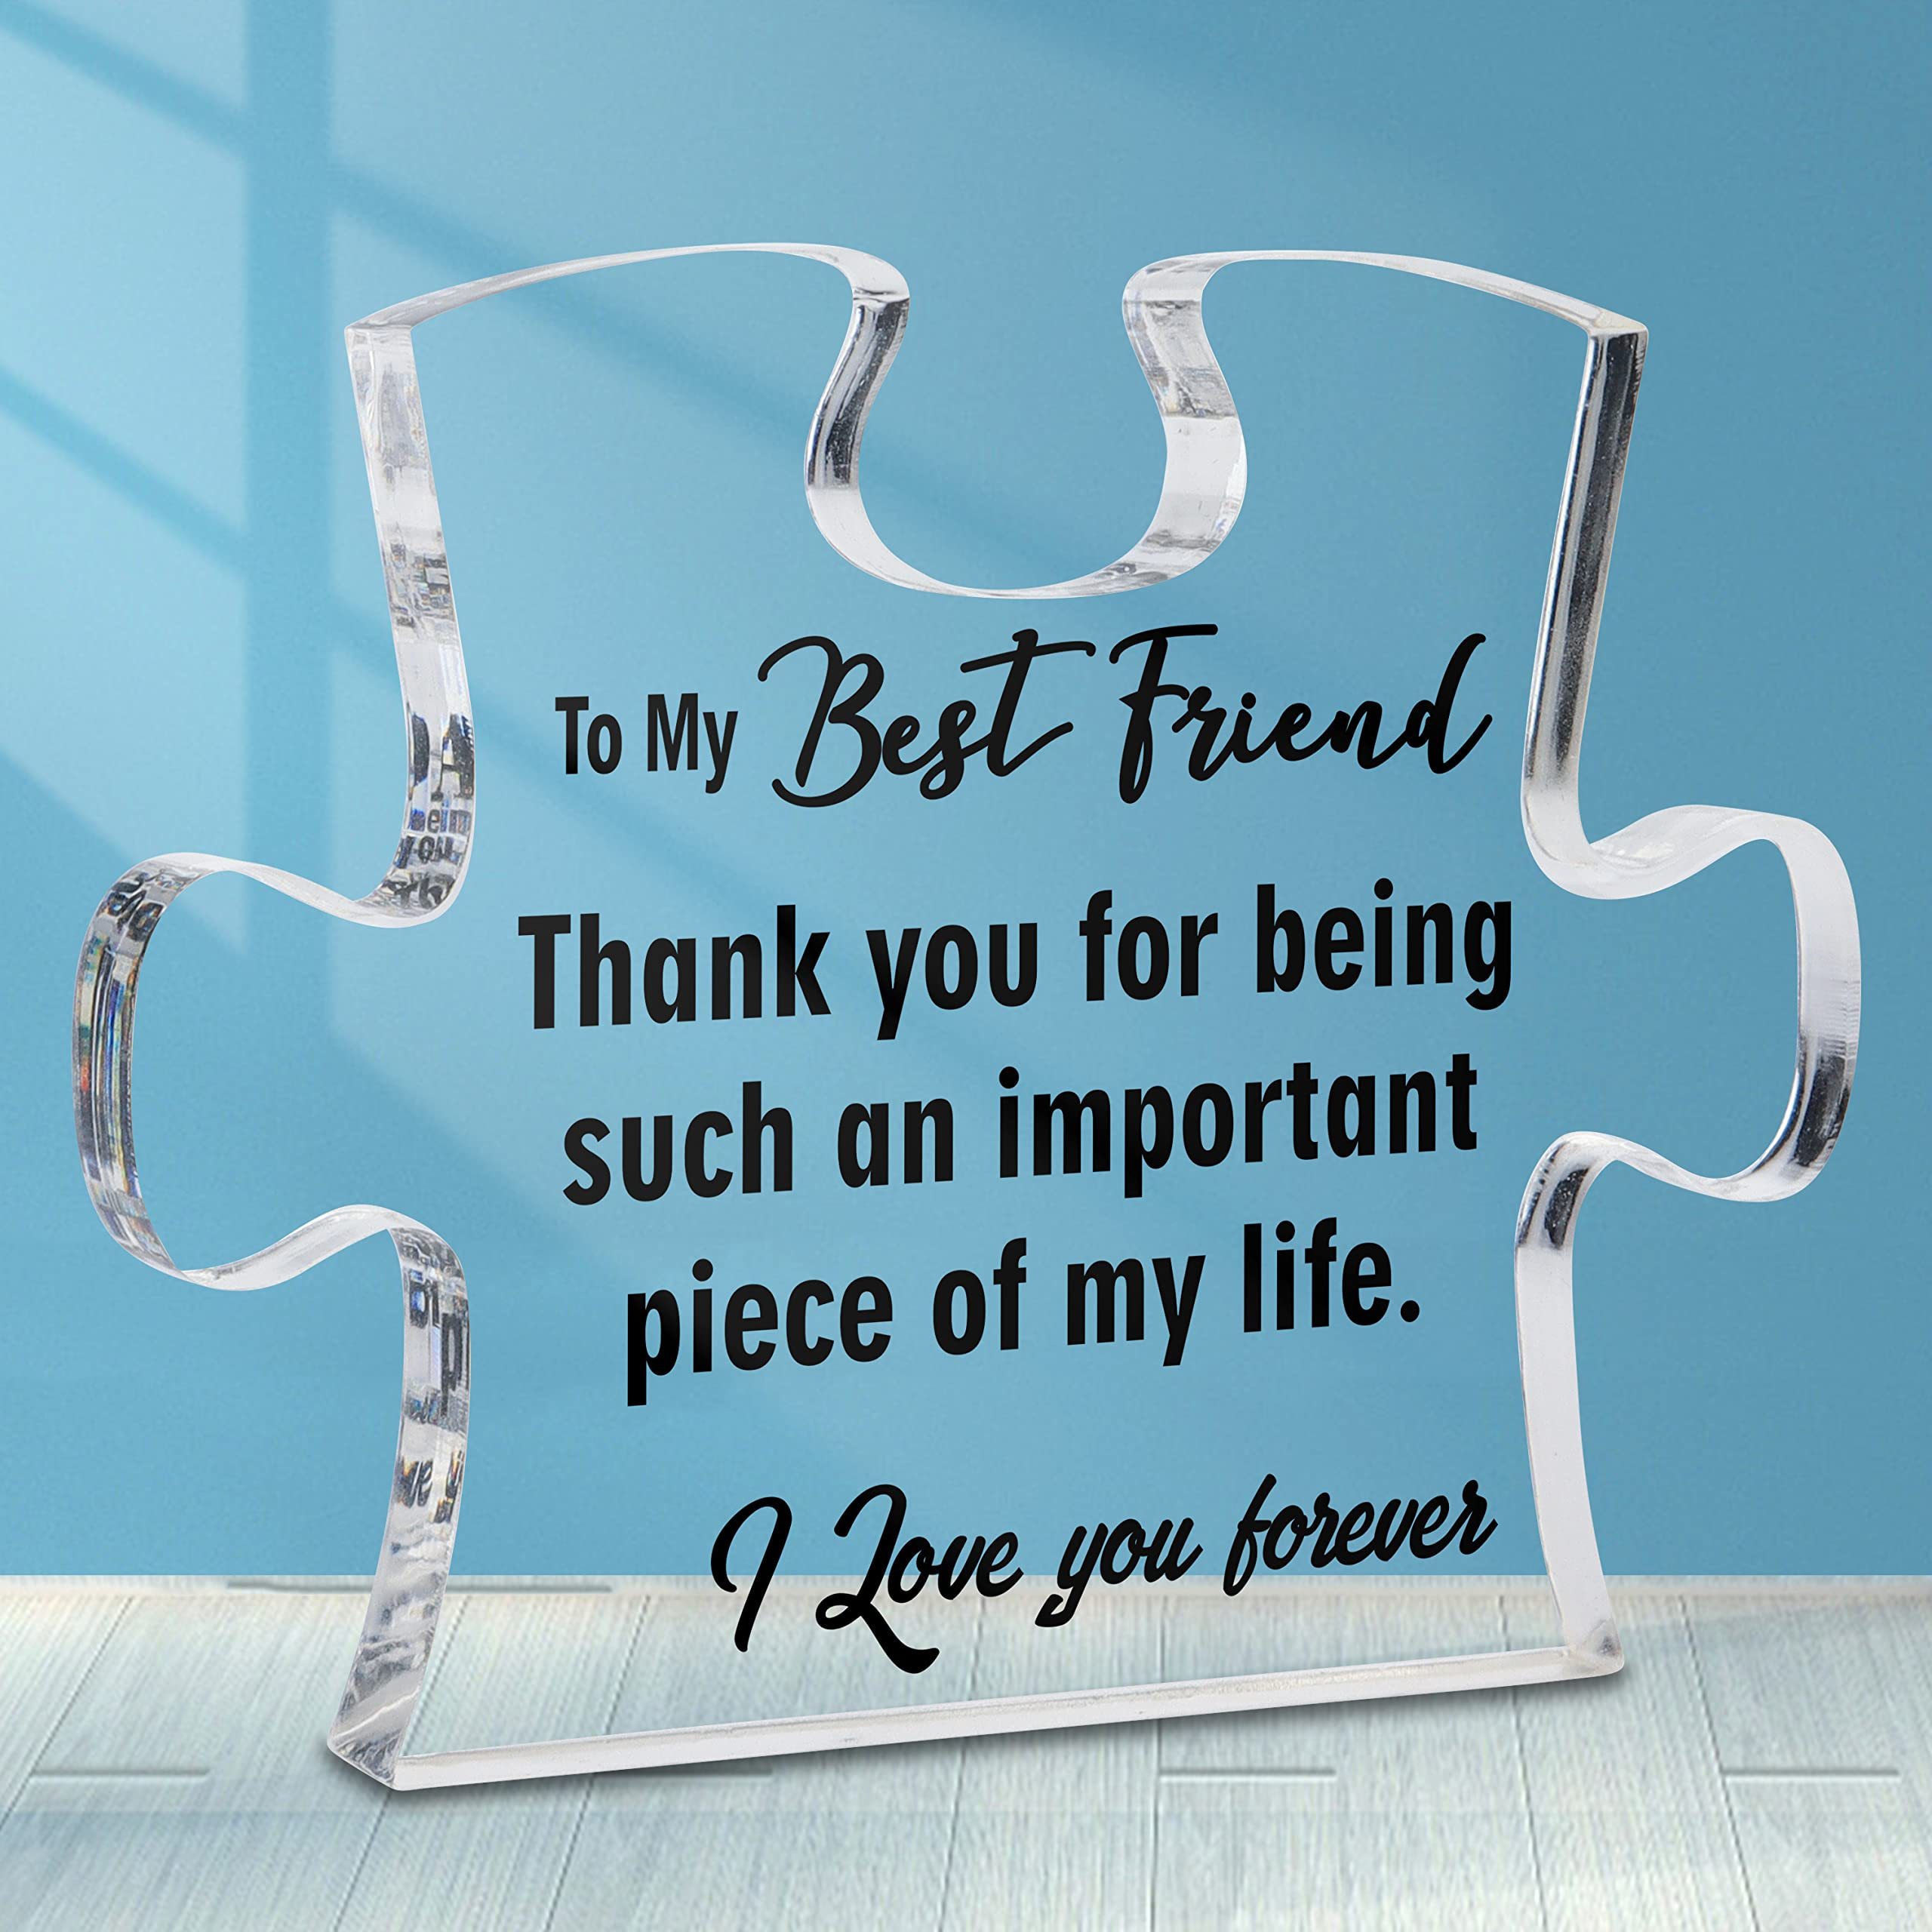 Friendship Gifts for Women Friends, Gifts for Friends Female,Thank You  Gifts,Inspirational Gifts,Birthday Presents for Women,Gifts for